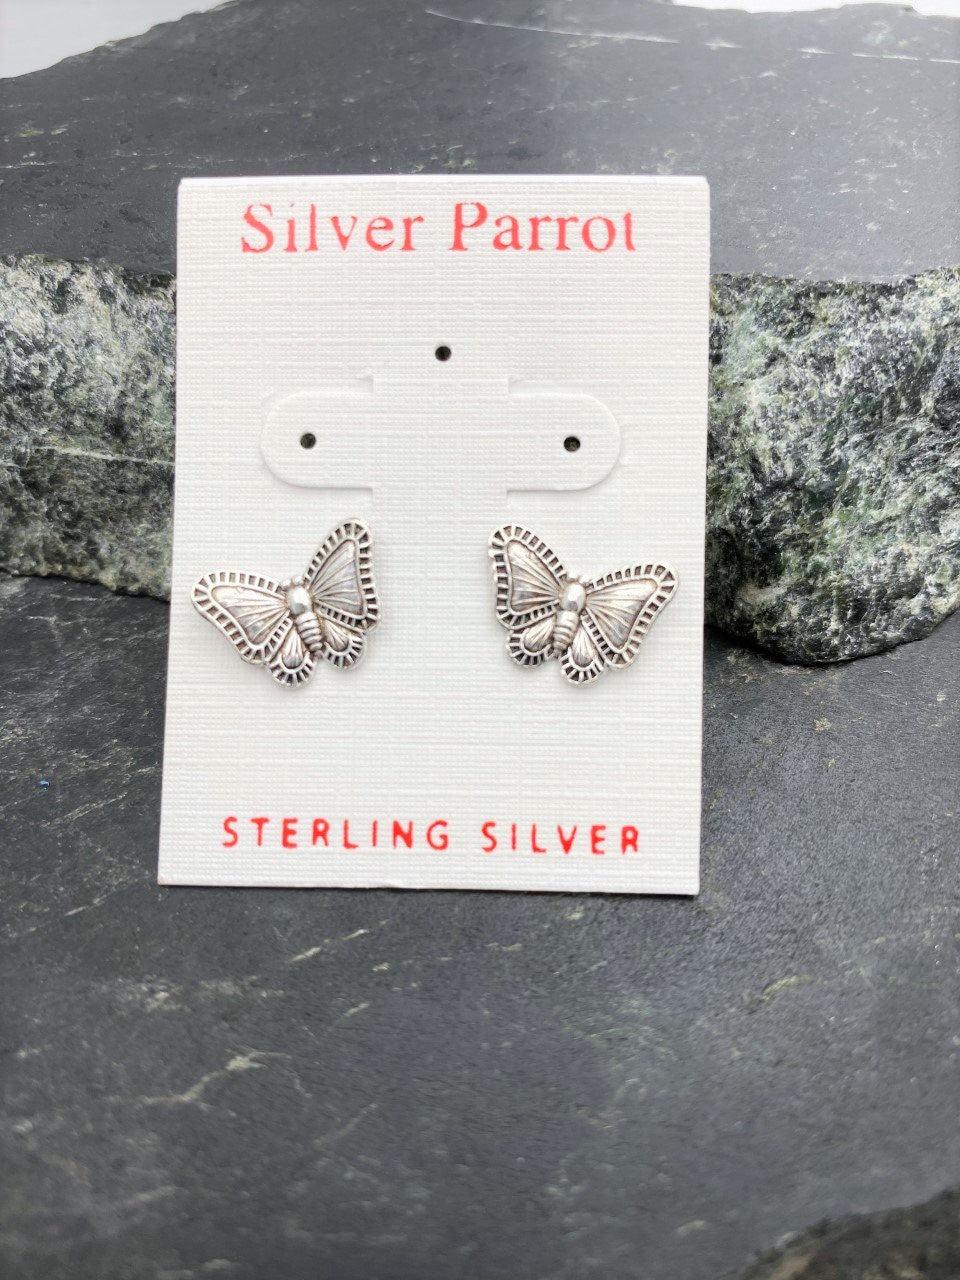 Sterling silver butterfly stud earrings displayed on a white Silver Parrot jewelry card.